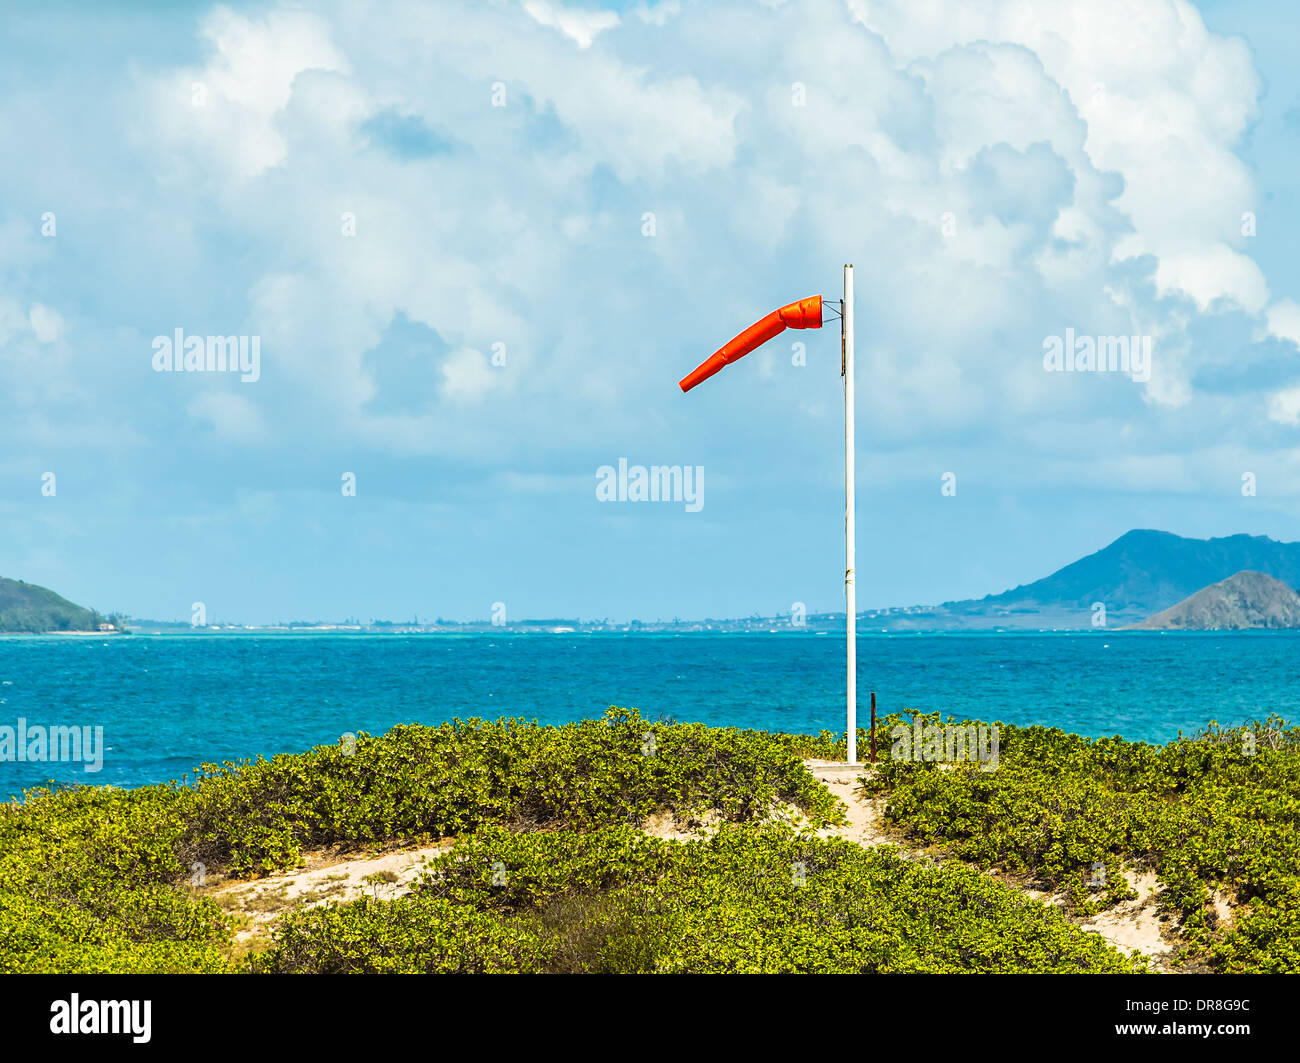 A windsock blowing in the wind above Waimanalo Bay on Oahu, Hawaii Stock Photo